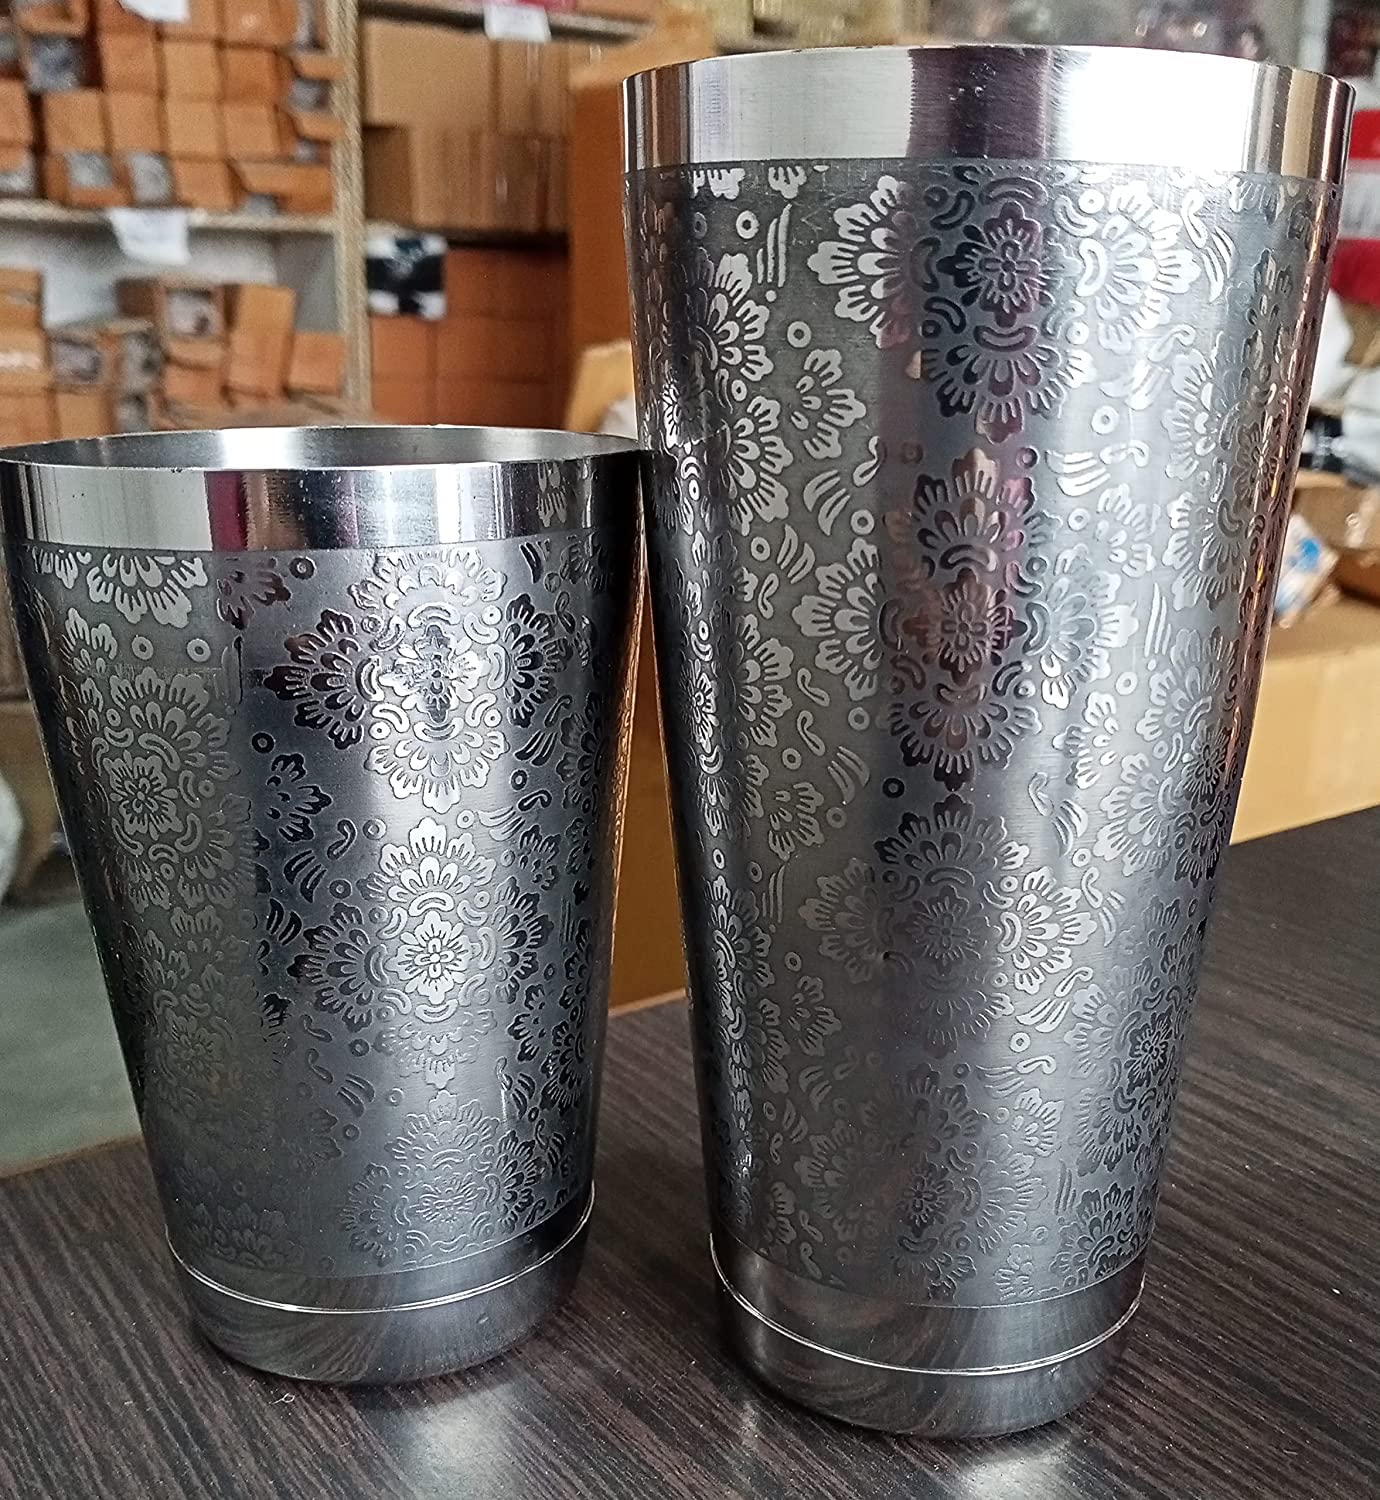 NJ OVERSEAS Boston Cocktail Shaker with Engraving 2 Pieces Set: 540 ml & 840 ml Weighted Base